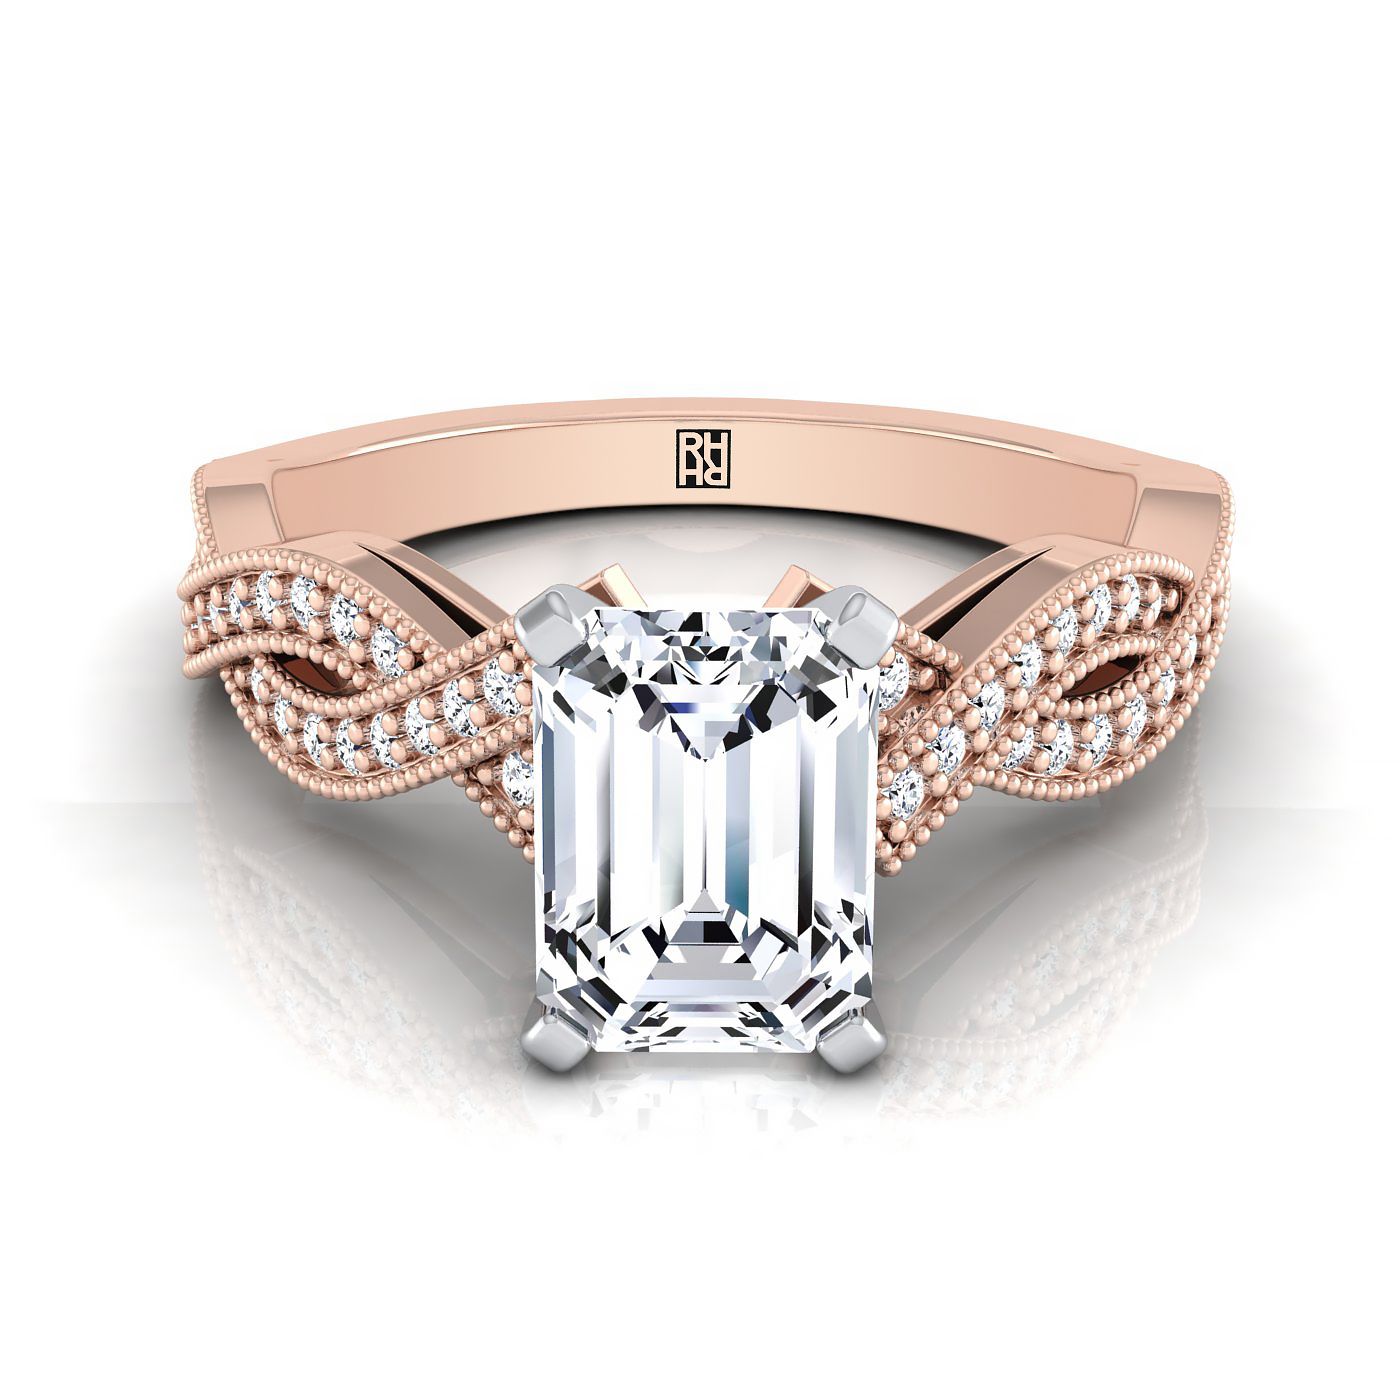 14K Rose Gold Emerald Cut Antique Twisted Open Beaded Diamond Halo Engagement Ring -1/5ctw